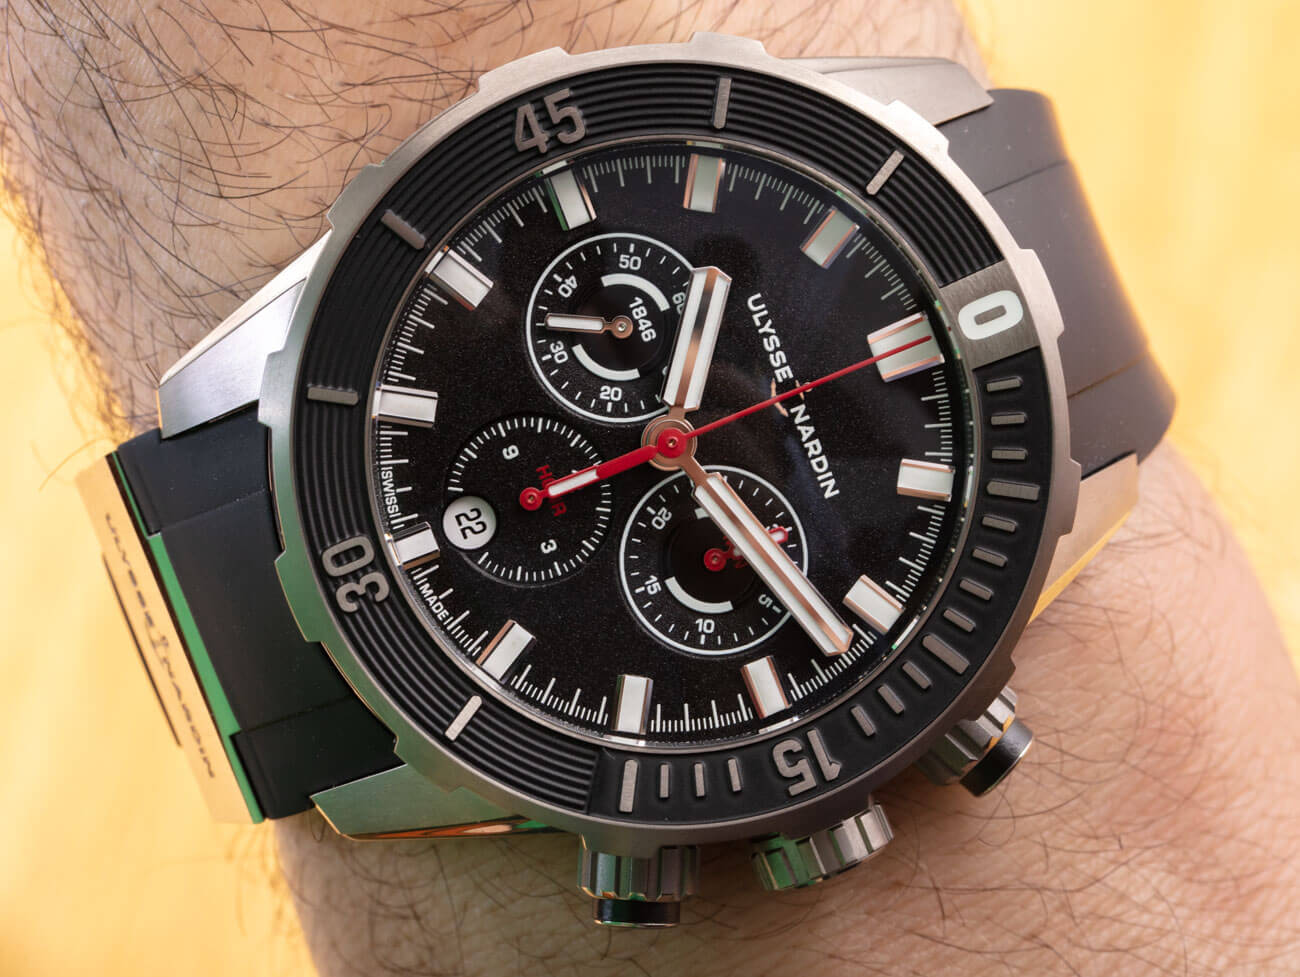 Watch Review: Ulysse Nardin Diver Chronograph 44 mm